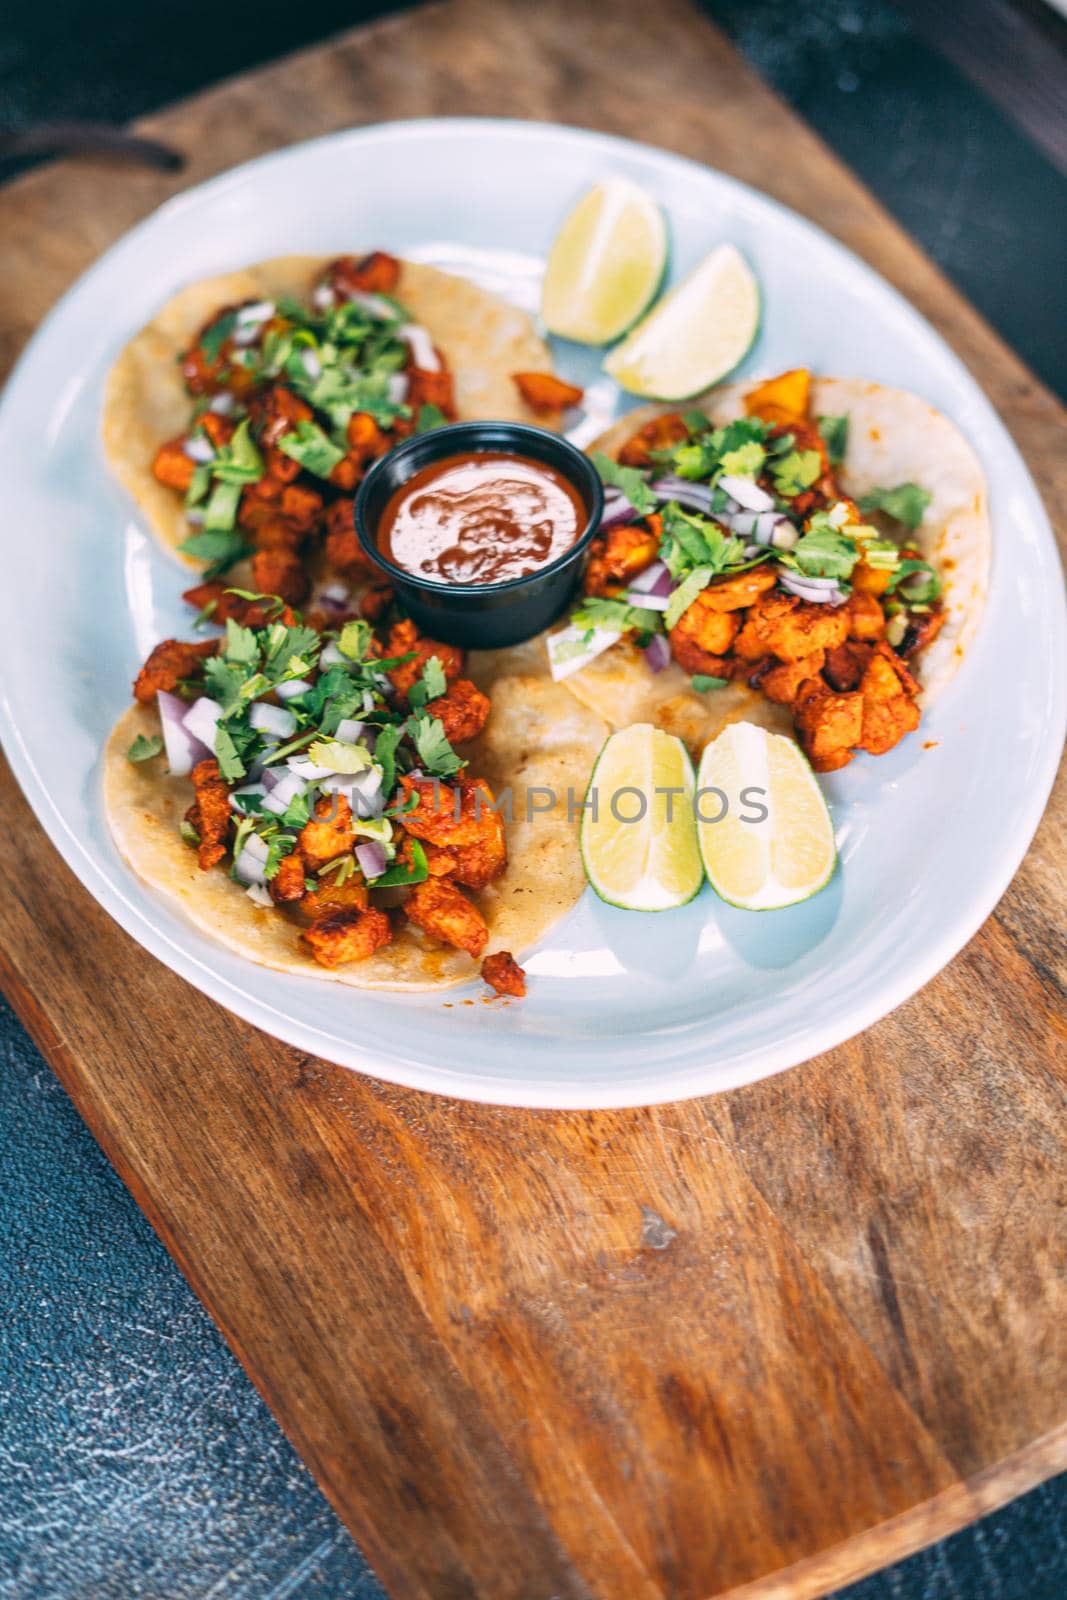 A plate of tacos and tortilla by castaldostudio